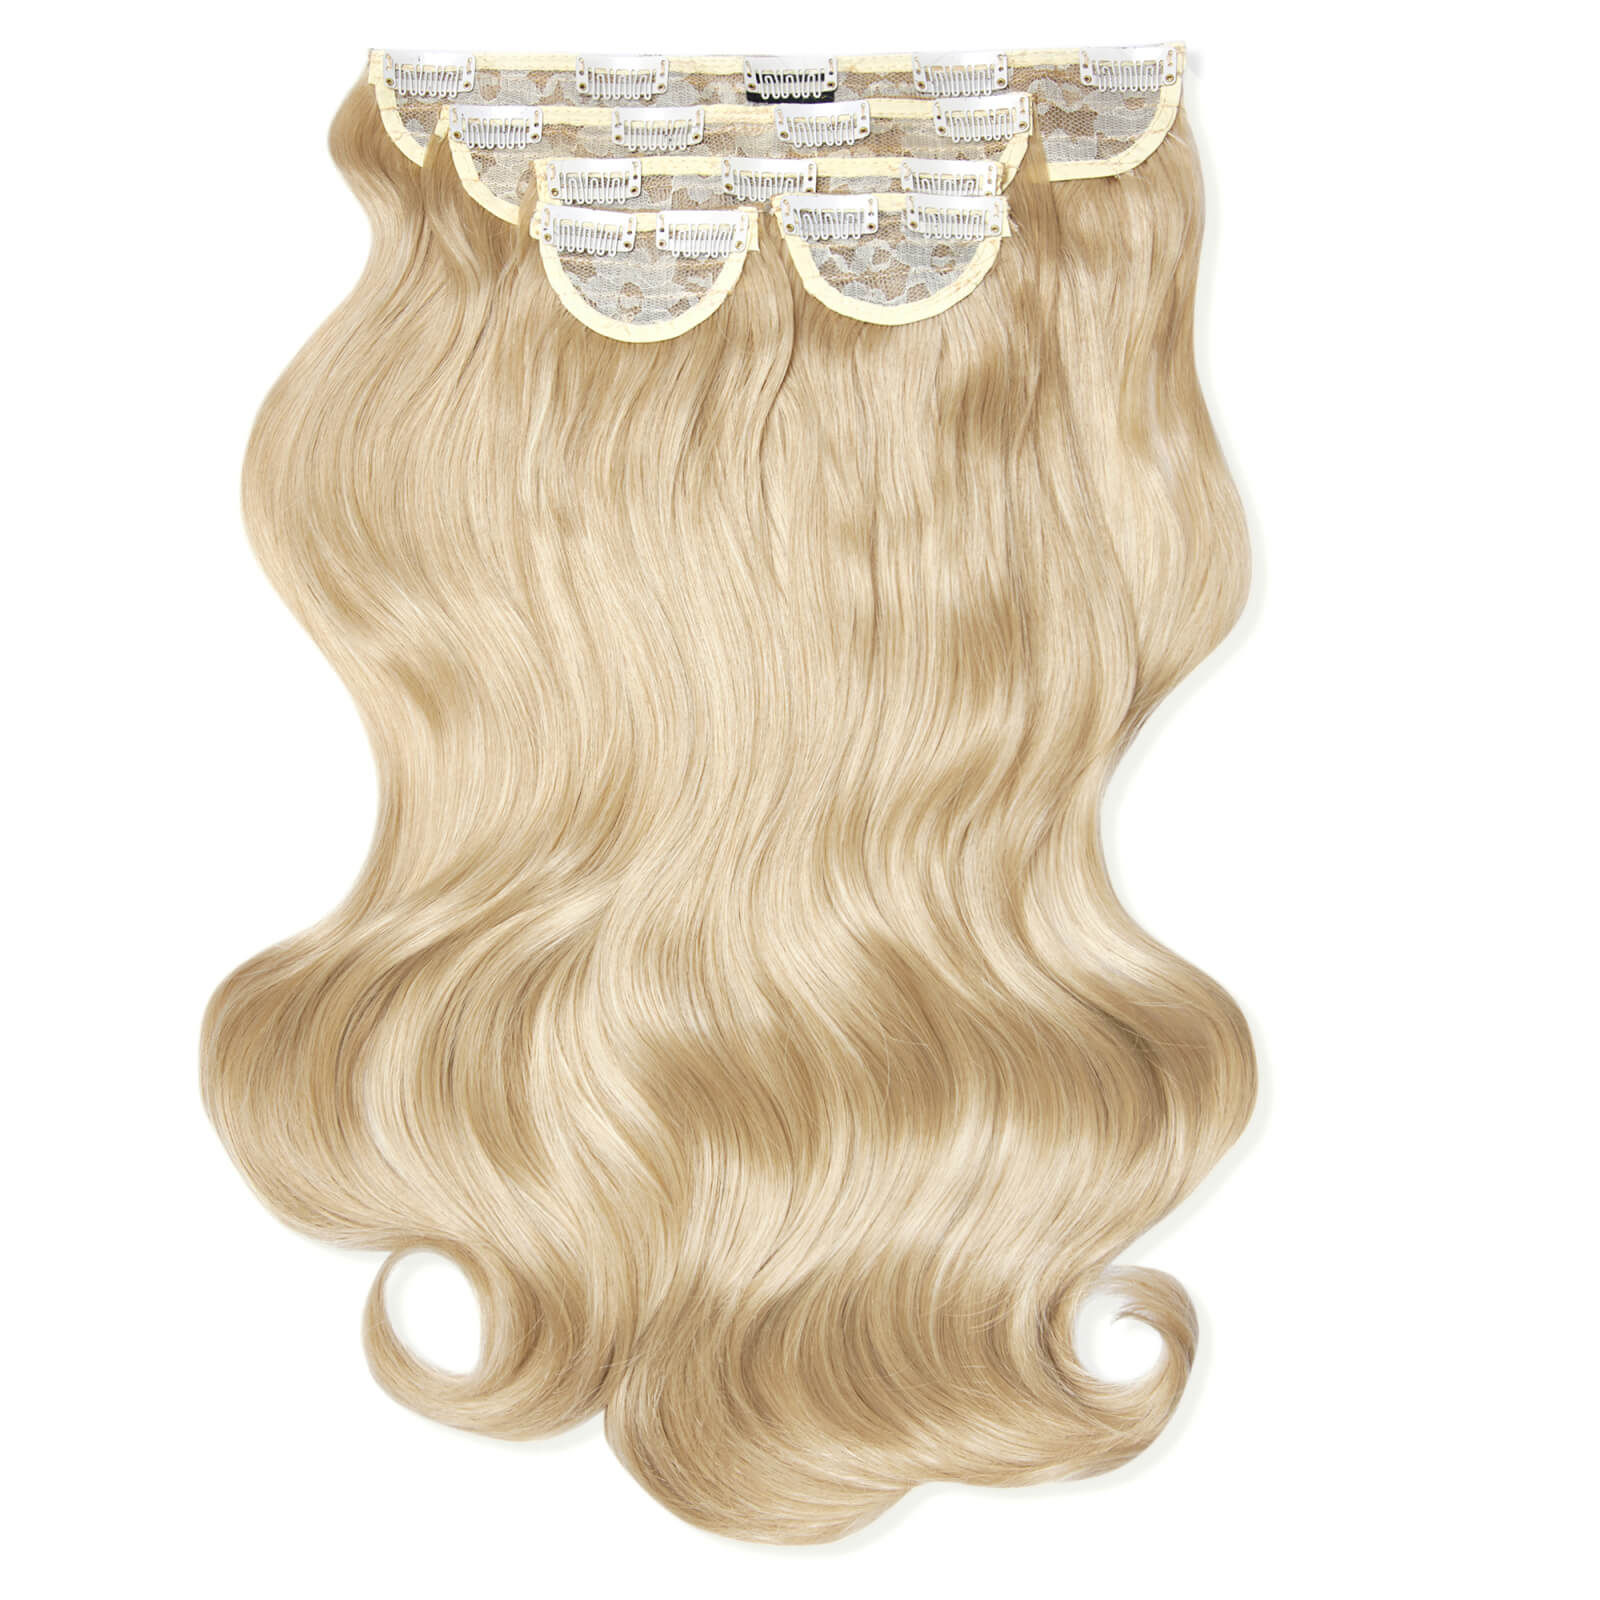 LullaBellz Super Thick 22 5 Piece Natural Wavy Clip In Extensions (Various Shades) - Light blonde - Bleach Blonde